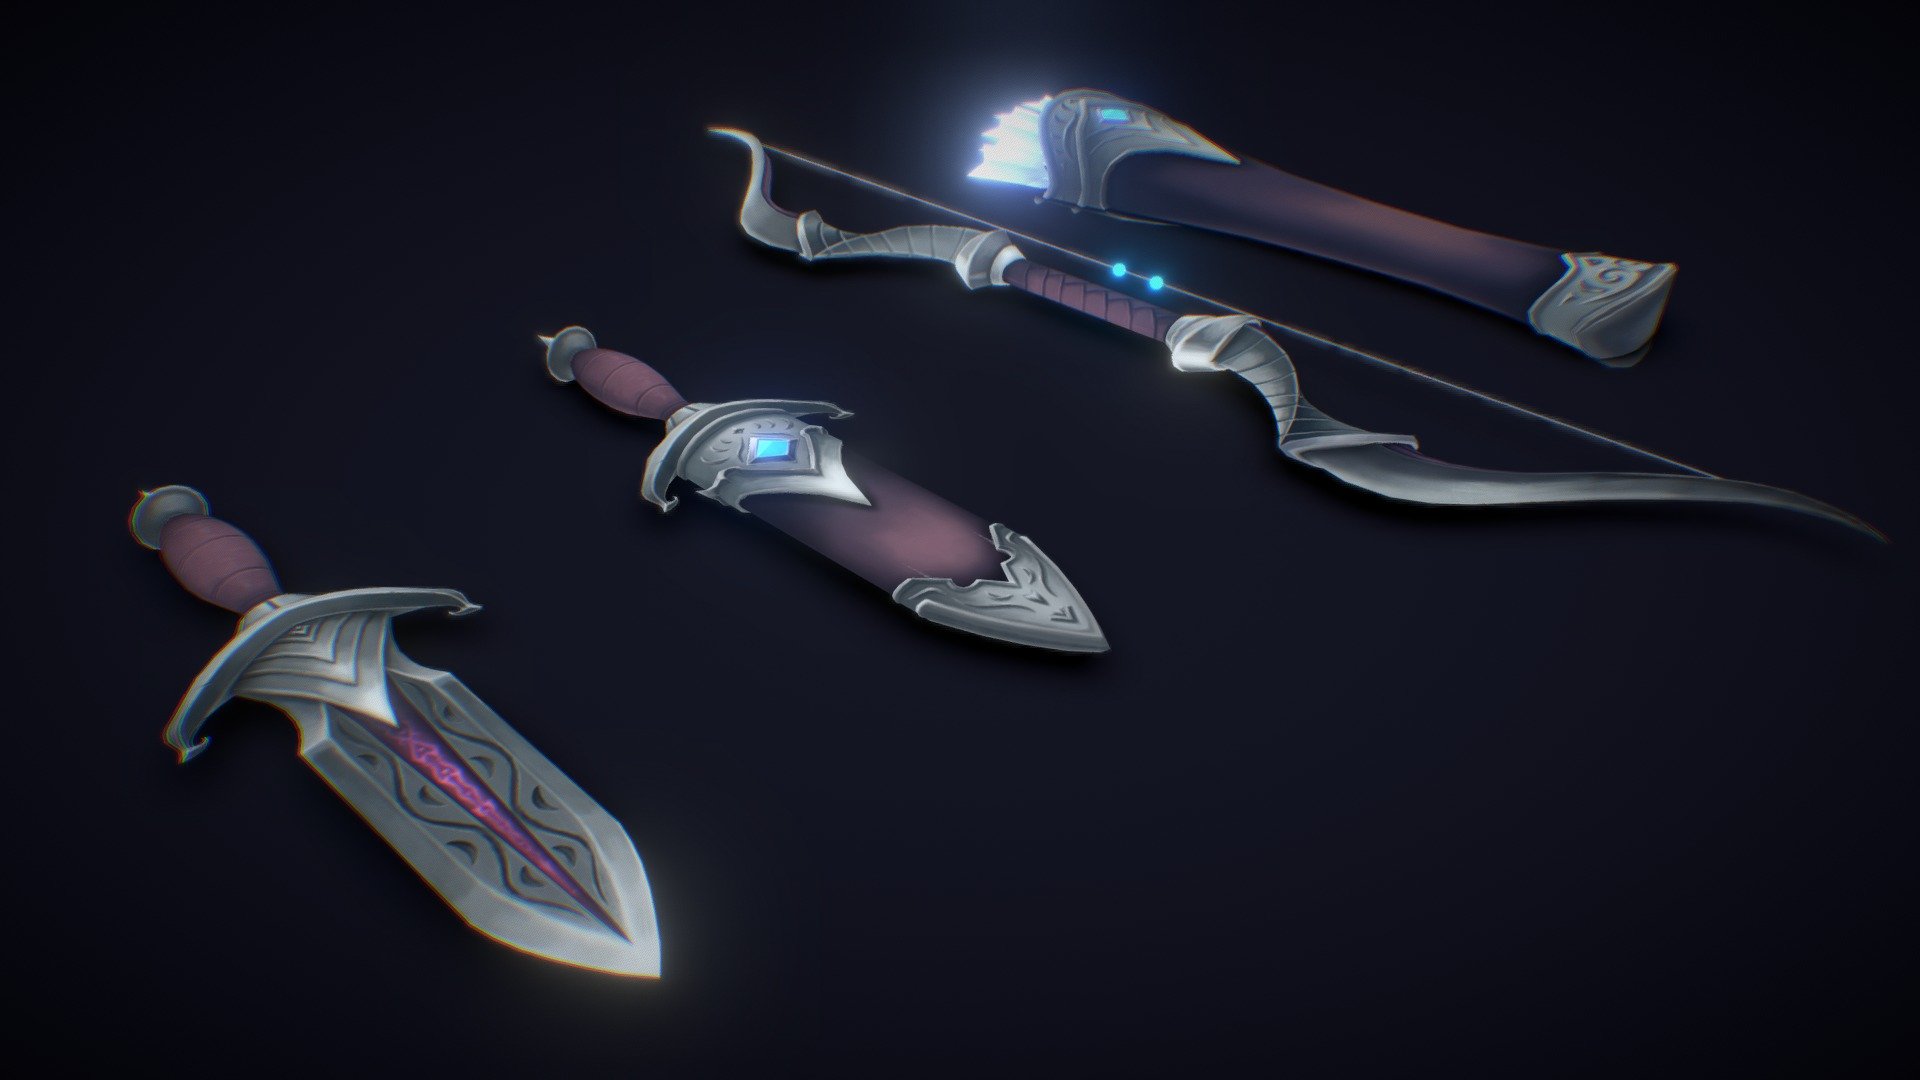 With this project I wanted to challenge myself with making a set of handpainted props. No pbr, just my photoshop brushes.

Based on my own concept of a weapon set for ranger kind of character 3d model